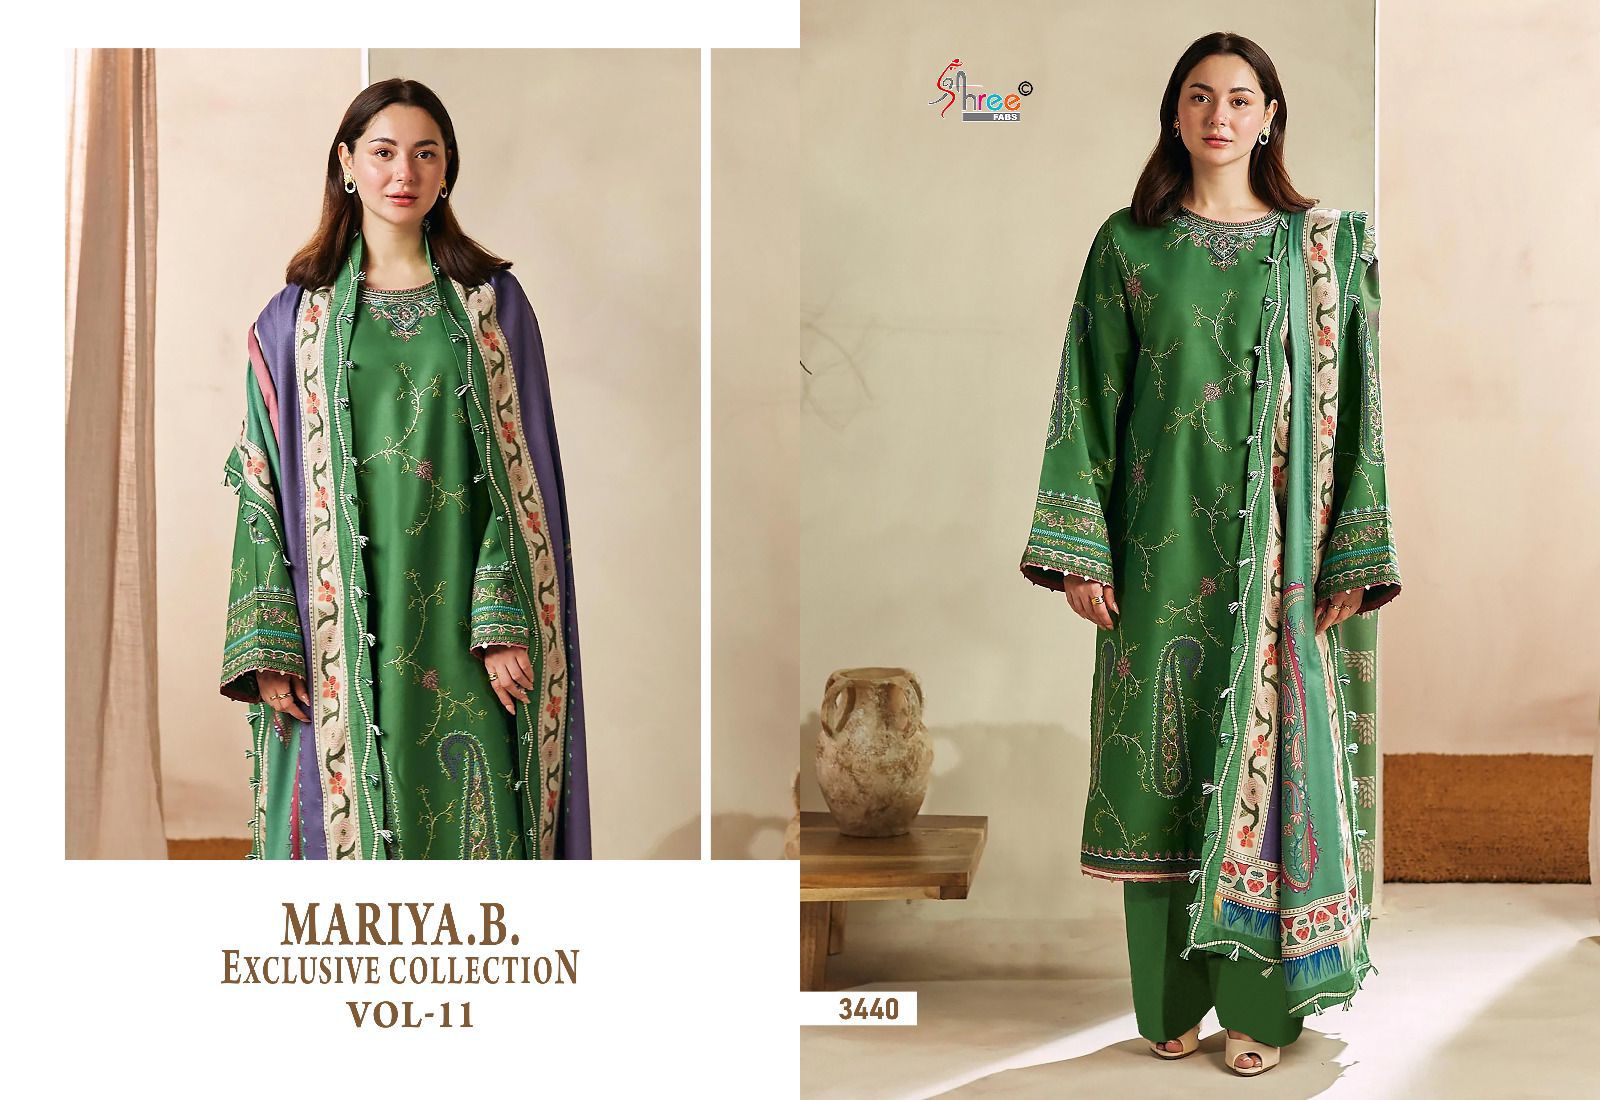 Shree Maria B Exclusive Collection Vol 11 collection 4